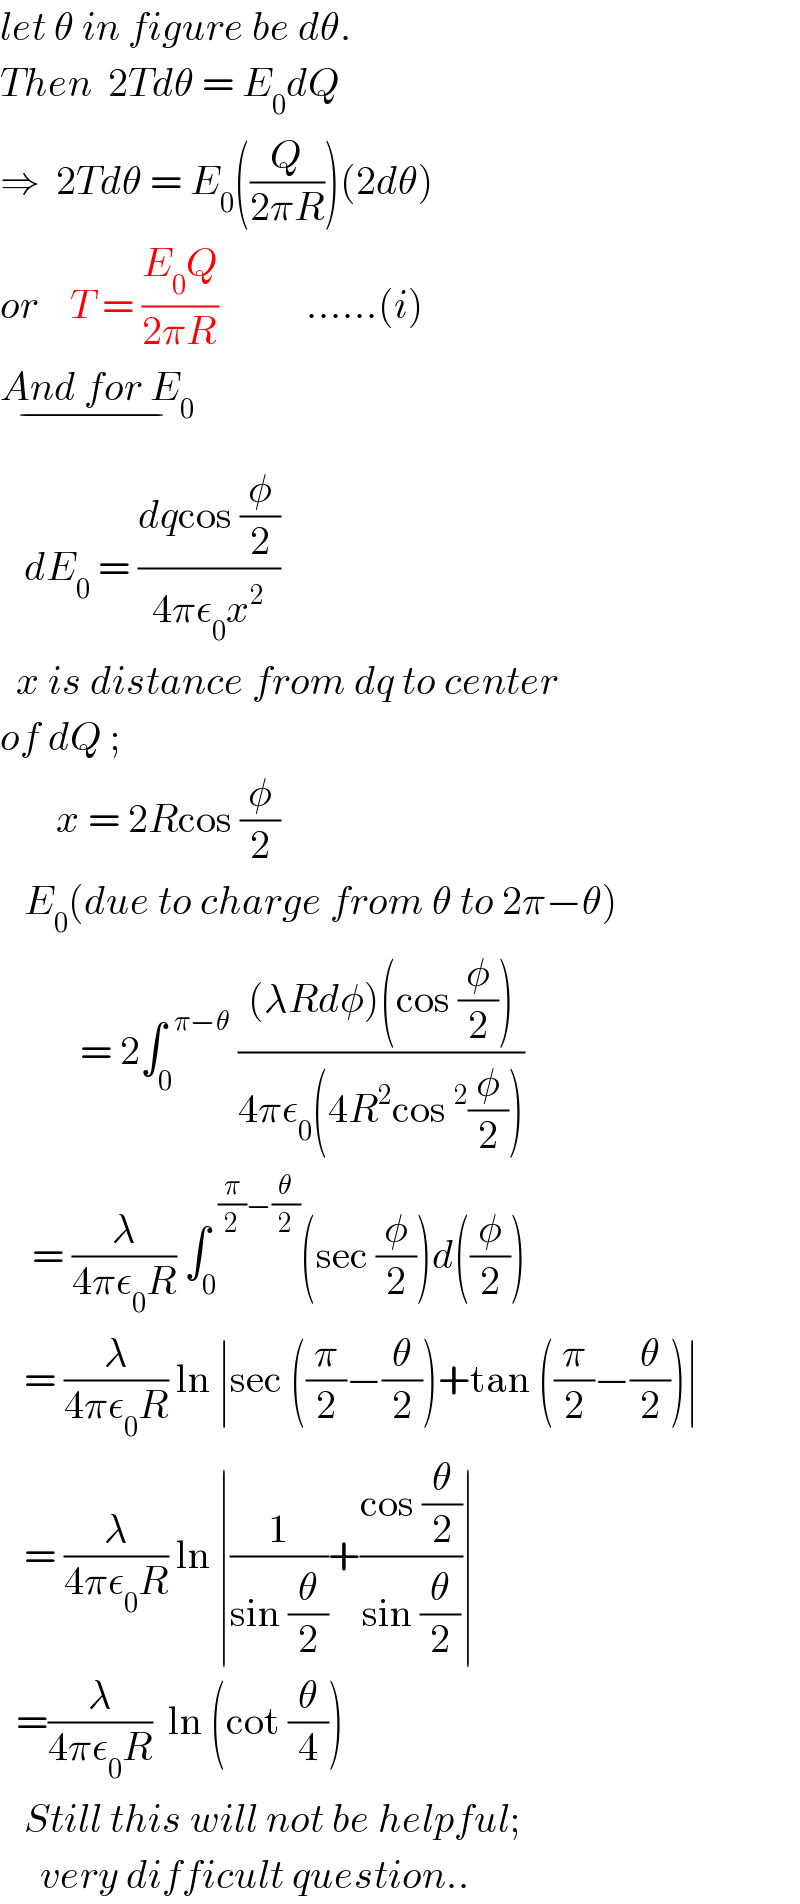 let θ in figure be dθ.  Then  2Tdθ = E_0 dQ  ⇒  2Tdθ = E_0 ((Q/(2πR)))(2dθ)  or    T = ((E_0 Q)/(2πR))           ......(i)  And for E_0 _(−)      dE_0  = ((dqcos (φ/2))/(4πε_0 x^2 ))    x is distance from dq to center  of dQ ;         x = 2Rcos (φ/2)     E_0 (due to charge from θ to 2π−θ)             = 2∫_0 ^(  π−θ)  (((λRdφ)(cos (φ/2)))/(4πε_0 (4R^2 cos^2 (φ/2))))      = (λ/(4πε_0 R)) ∫_0 ^(  (π/2)−(θ/2)) (sec (φ/2))d((φ/2))      = (λ/(4πε_0 R)) ln ∣sec ((π/2)−(θ/2))+tan ((π/2)−(θ/2))∣     = (λ/(4πε_0 R)) ln ∣(1/(sin (θ/2)))+((cos (θ/2))/(sin (θ/2)))∣    =(λ/(4πε_0 R))  ln (cot (θ/4))     Still this will not be helpful;       very difficult question..  